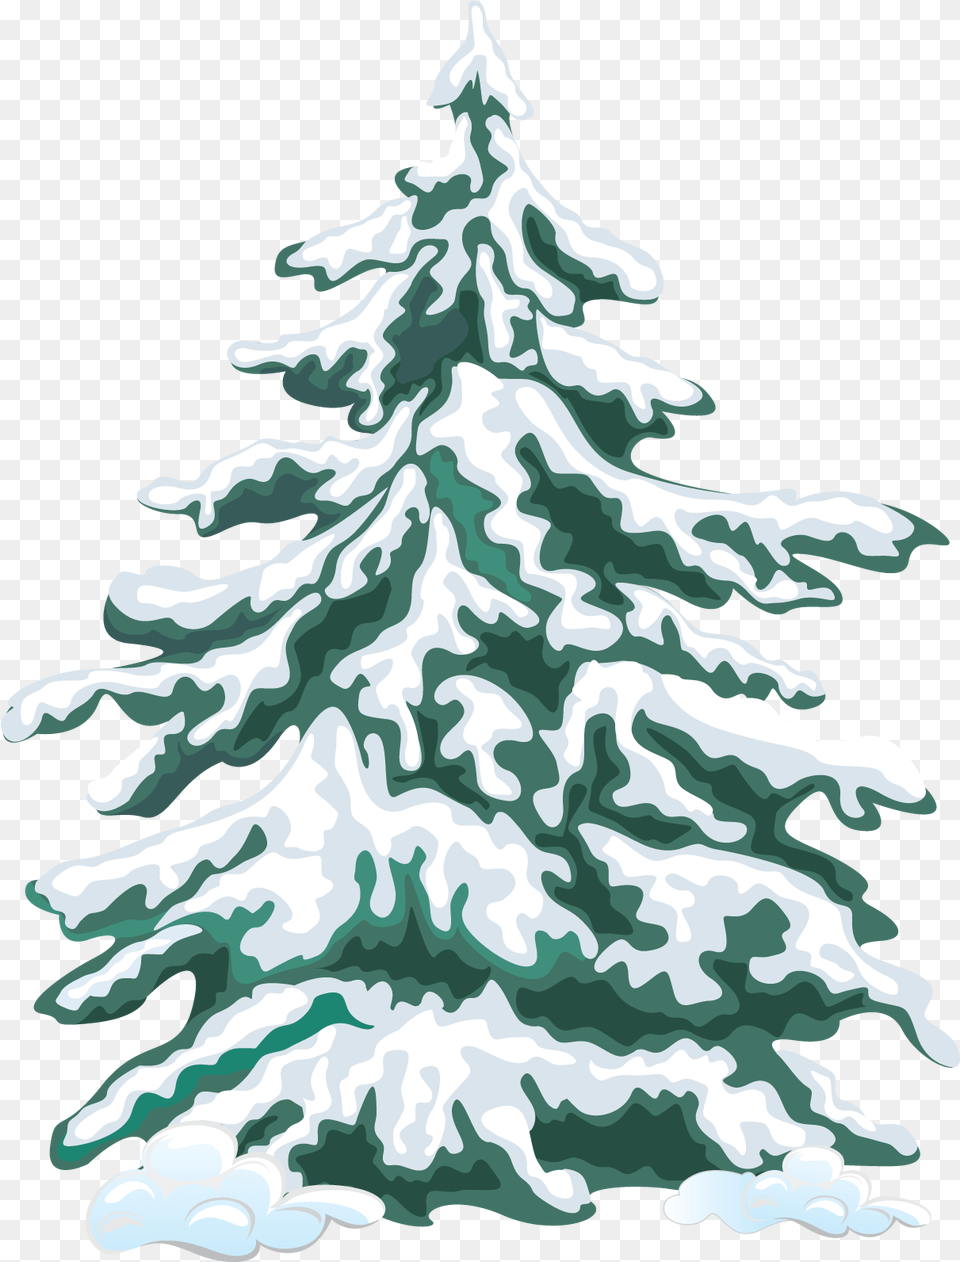 Library Of Evergreen Tree With Snow Jpg Christmas Tree Vector Snow, Fir, Plant, Pine, Christmas Decorations Free Png